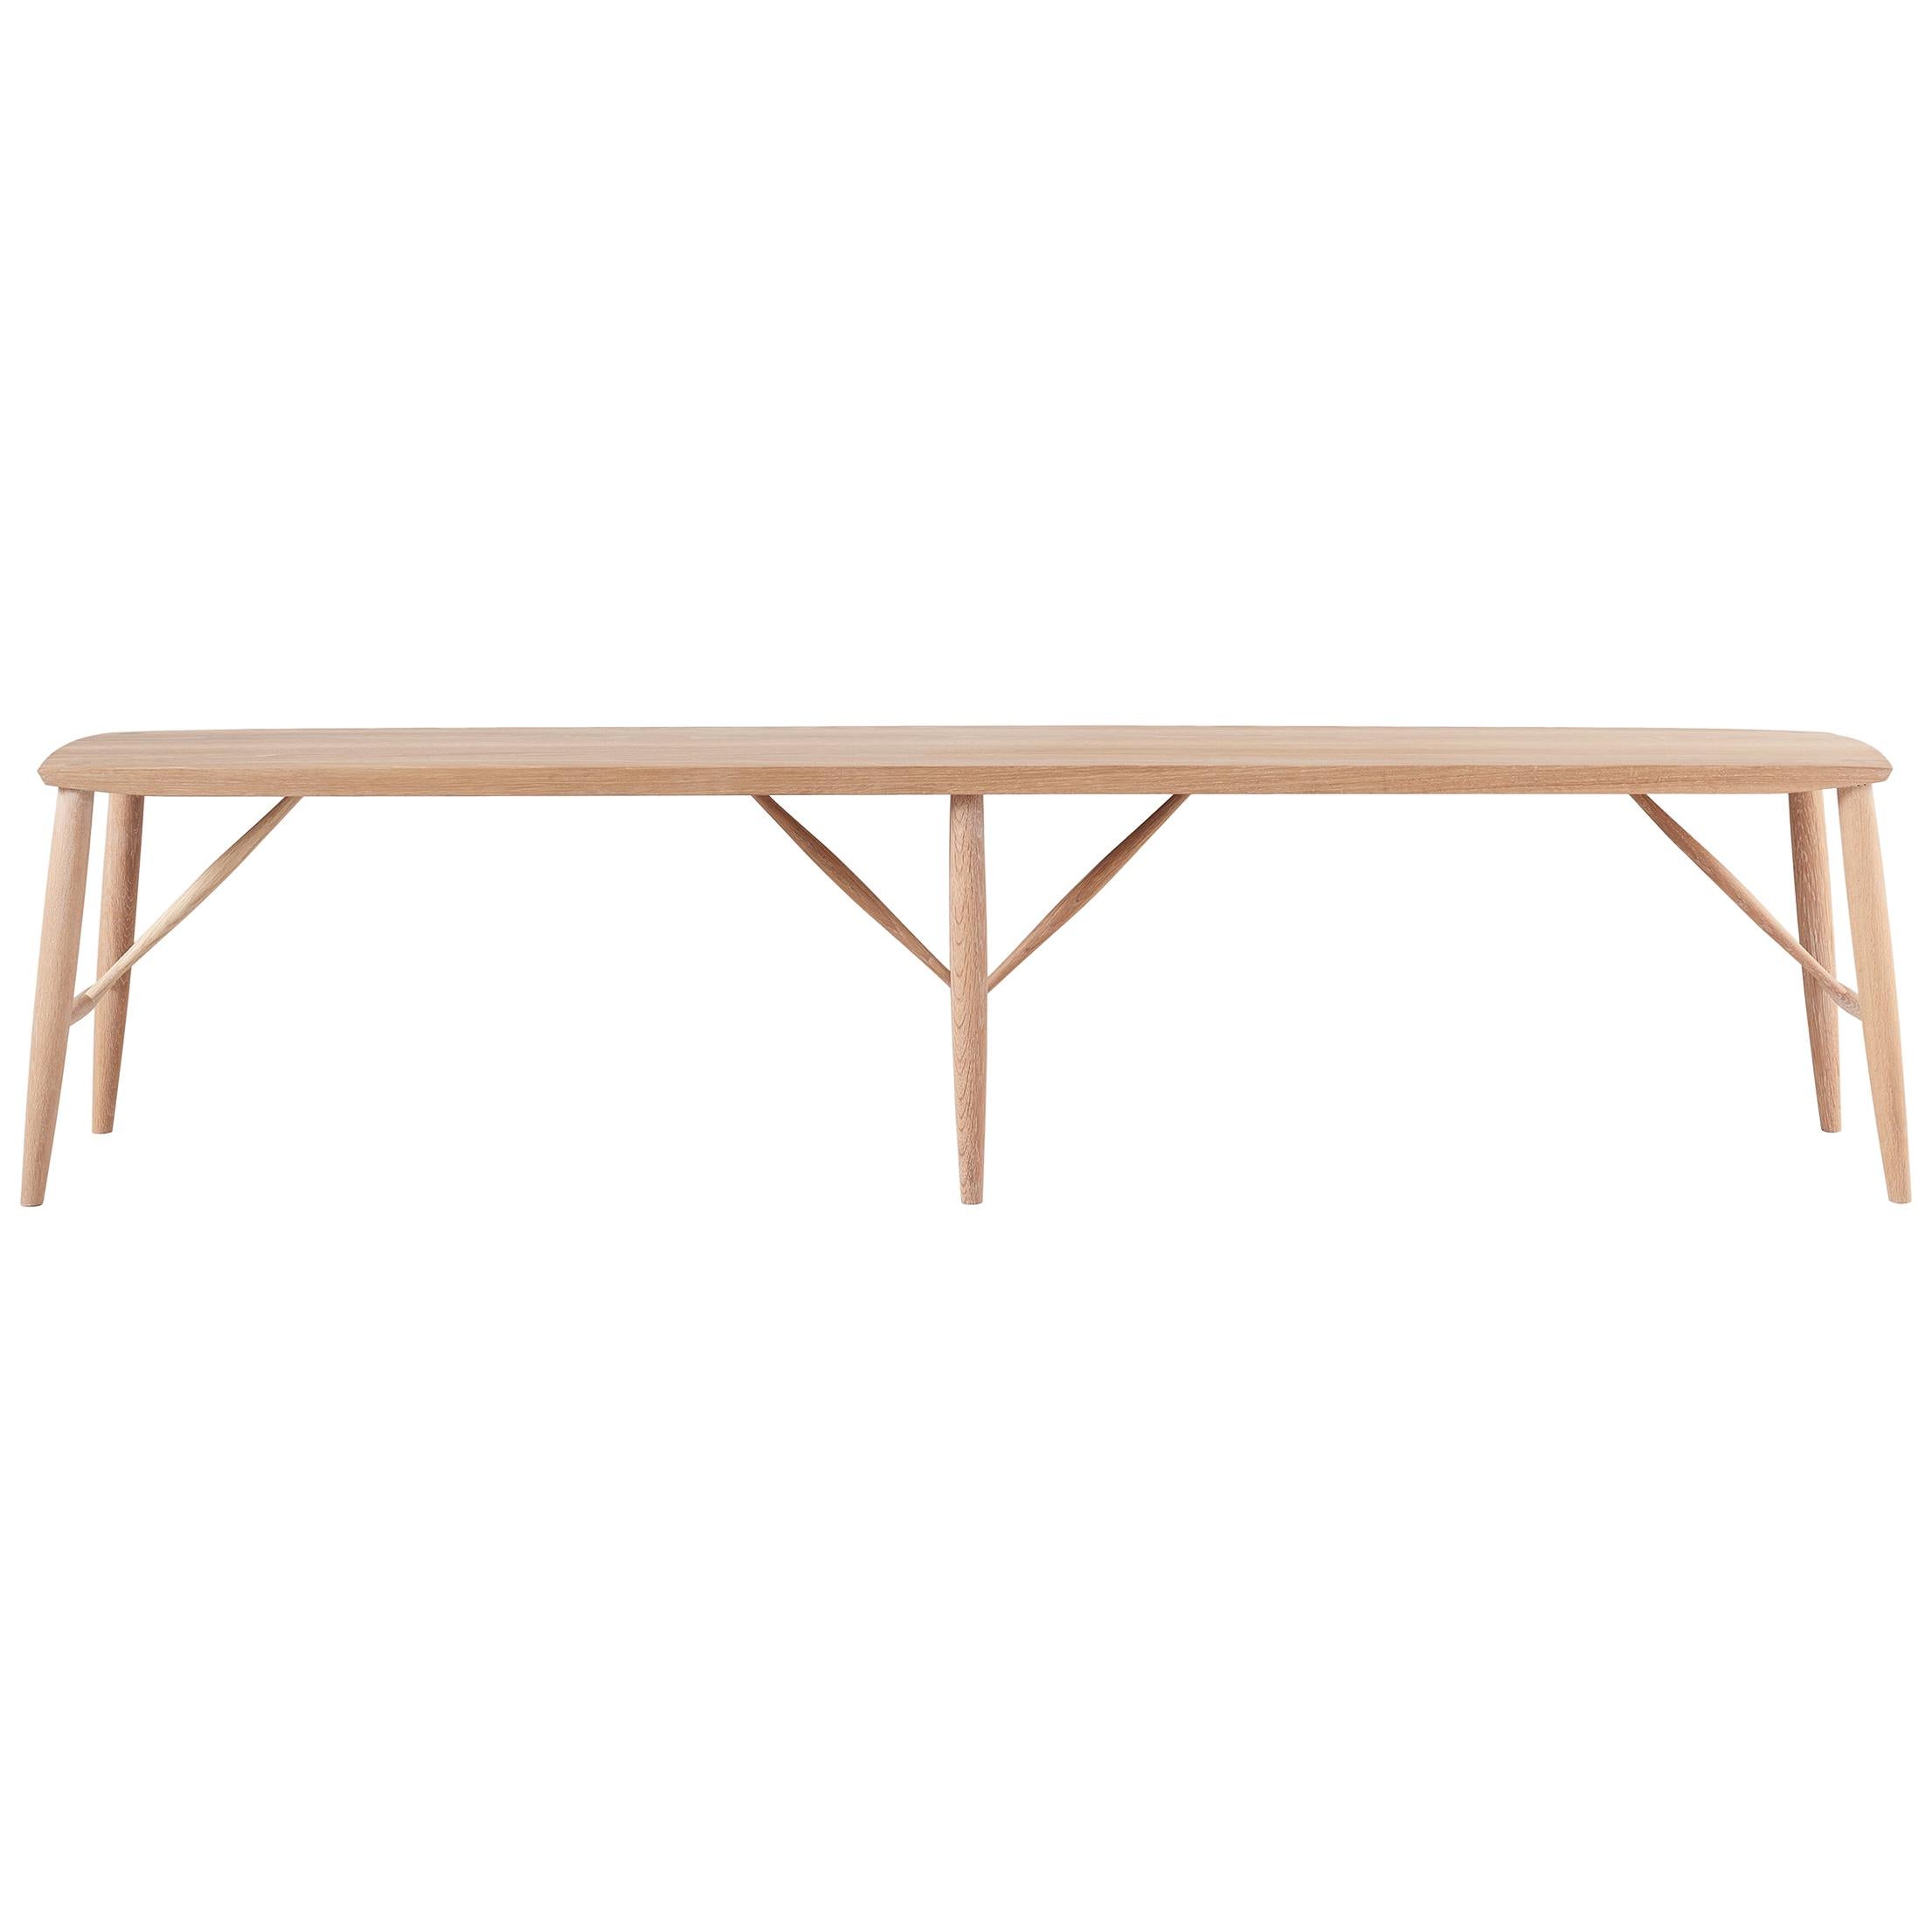 A versatile and durable bench suitable for a variety of applications including extra seating, hall entrance bench or even a narrow coffee table. The Adelaide bench is a welcome addition to any home. It is handcrafted with solid white oak and